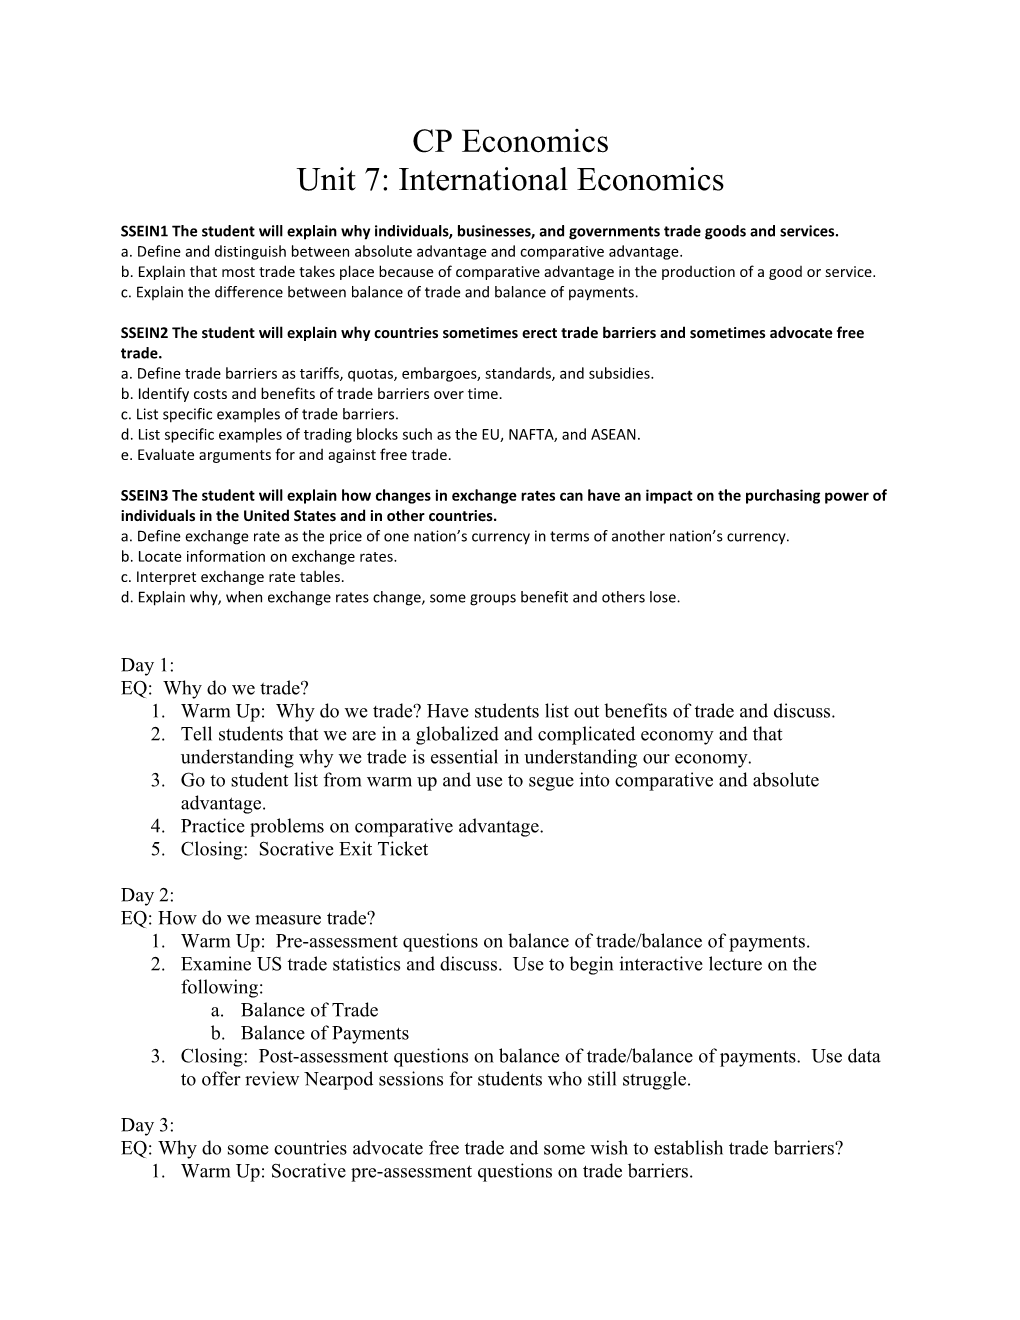 SSEIN1 the Student Will Explain Why Individuals, Businesses, and Governments Trade Goods